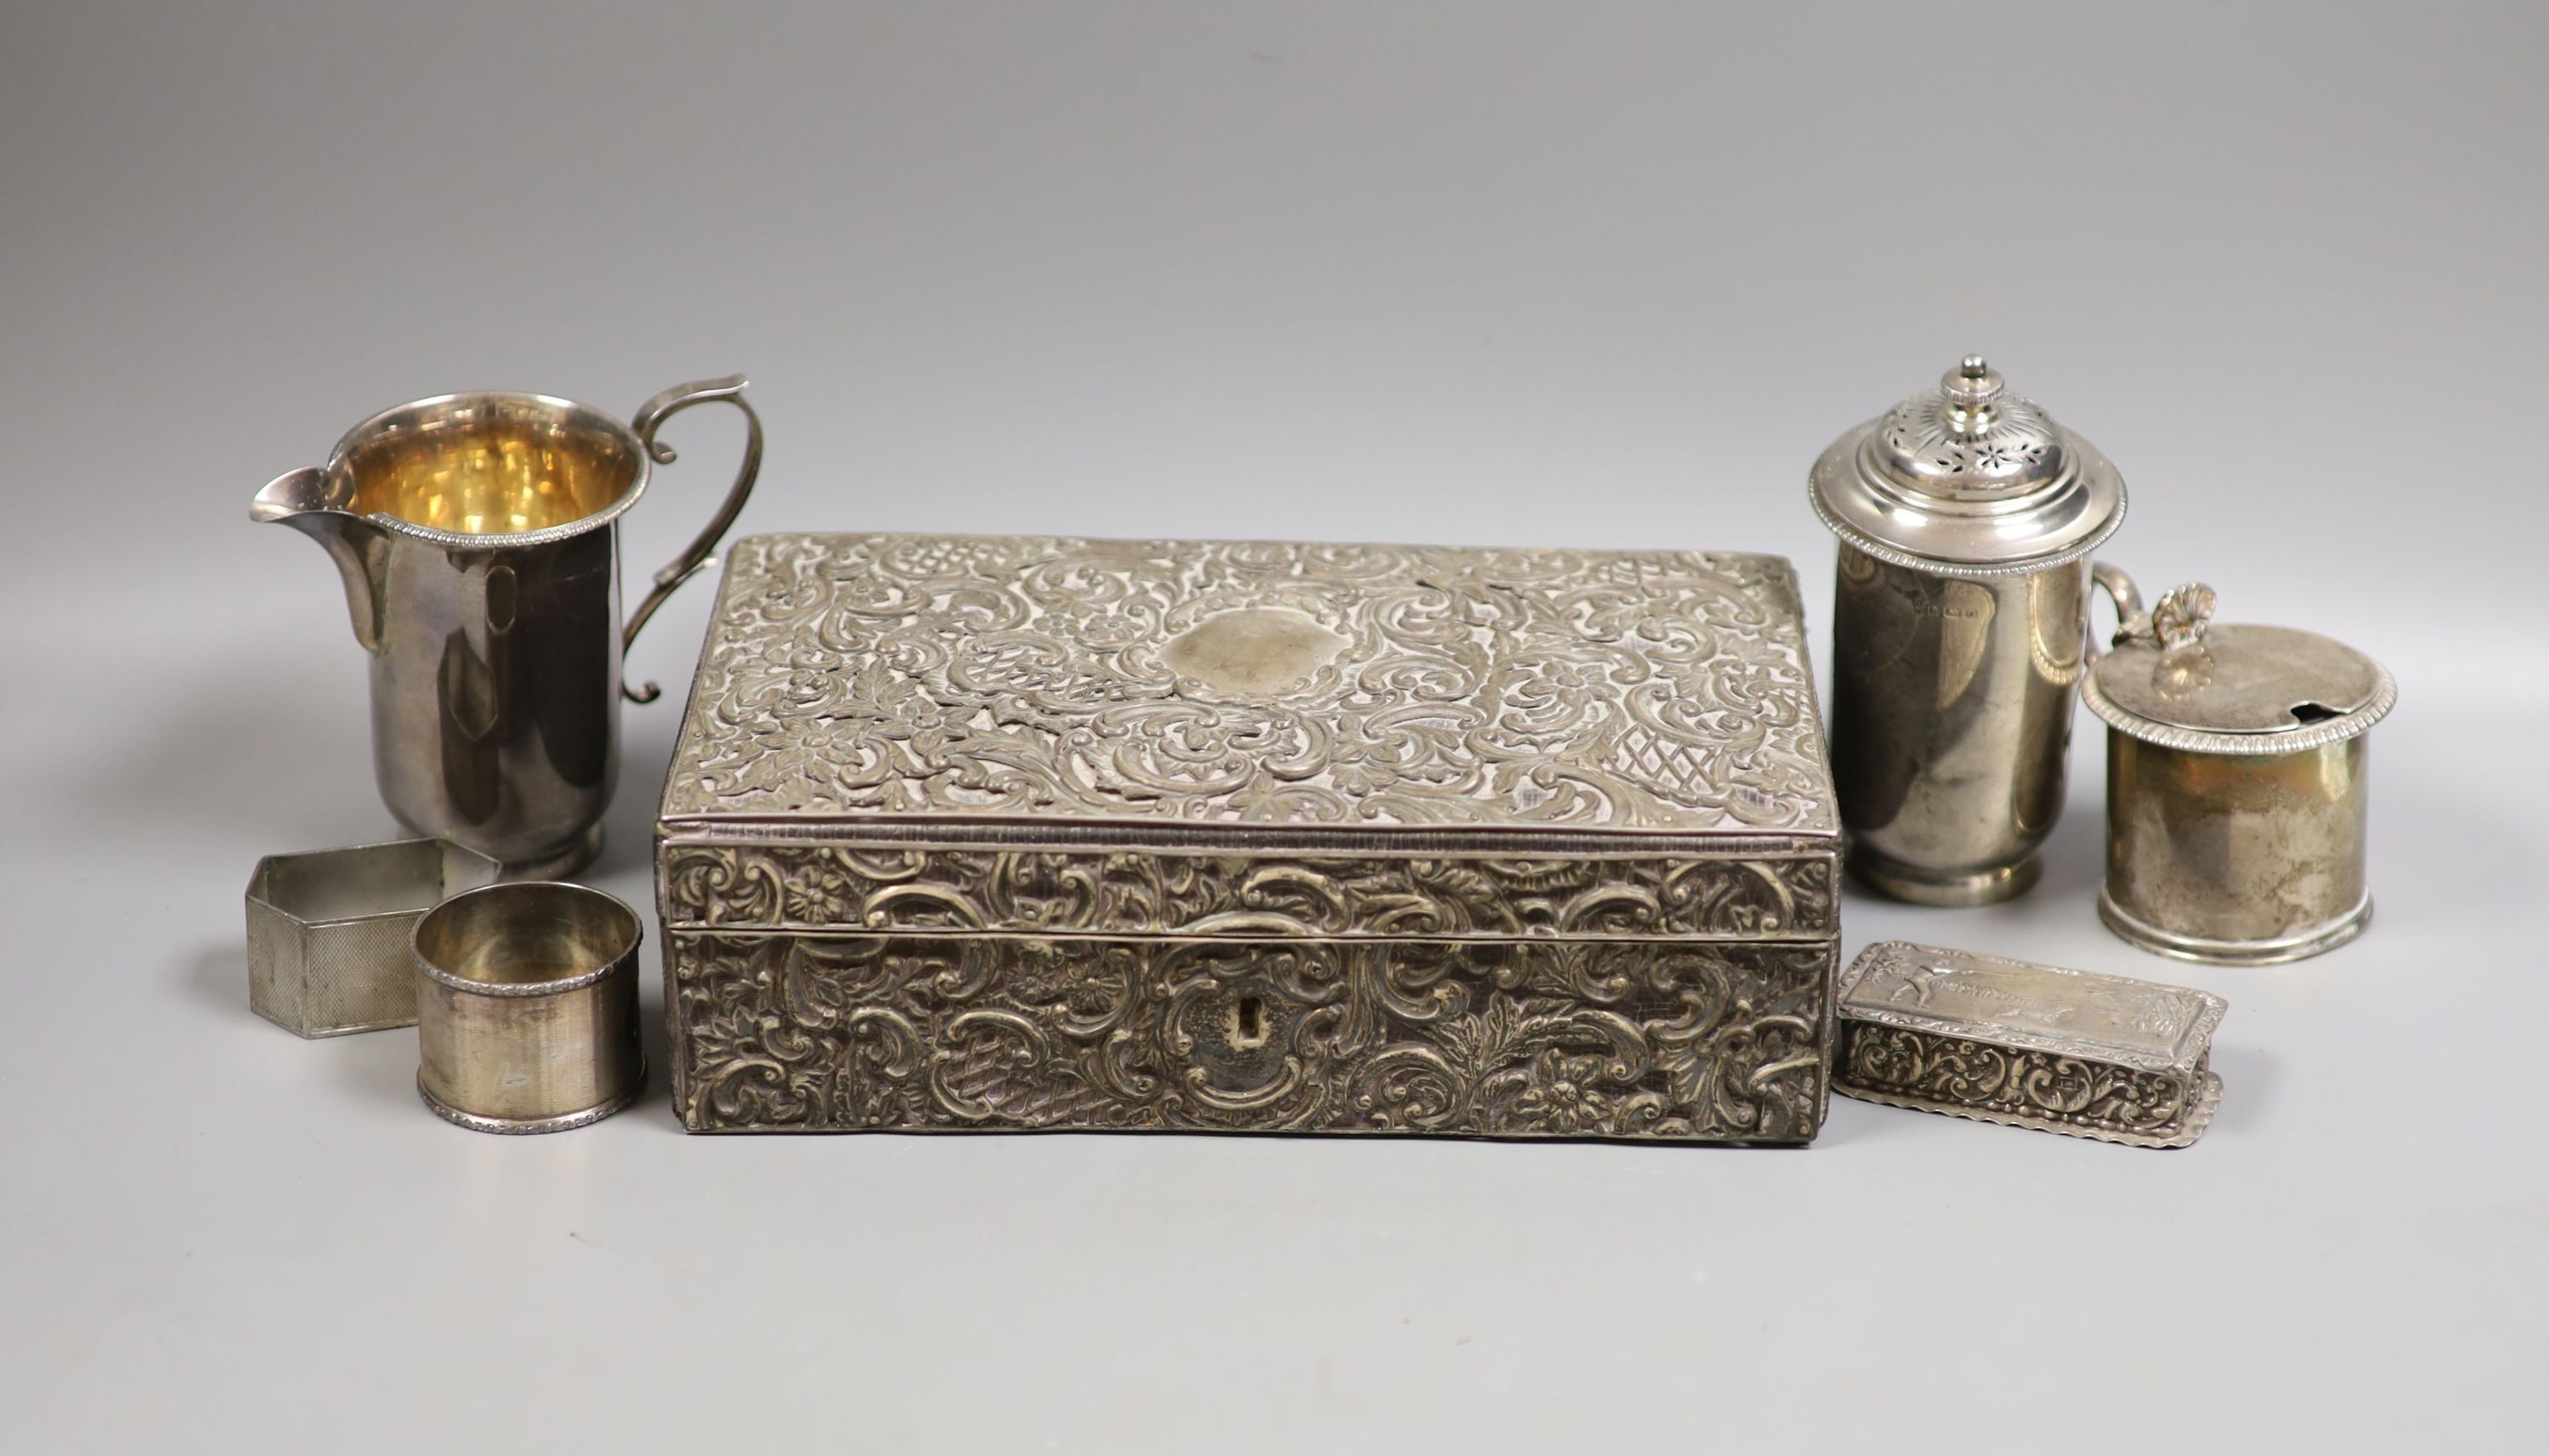 A late Victorian silver mounted leather rectangular jewellery casket, 23.2cm, a silver snuff box, the lid embossed with a wild fowling scene, a George V silver cream jug and pepper, two silver napkin rings and a Victoria